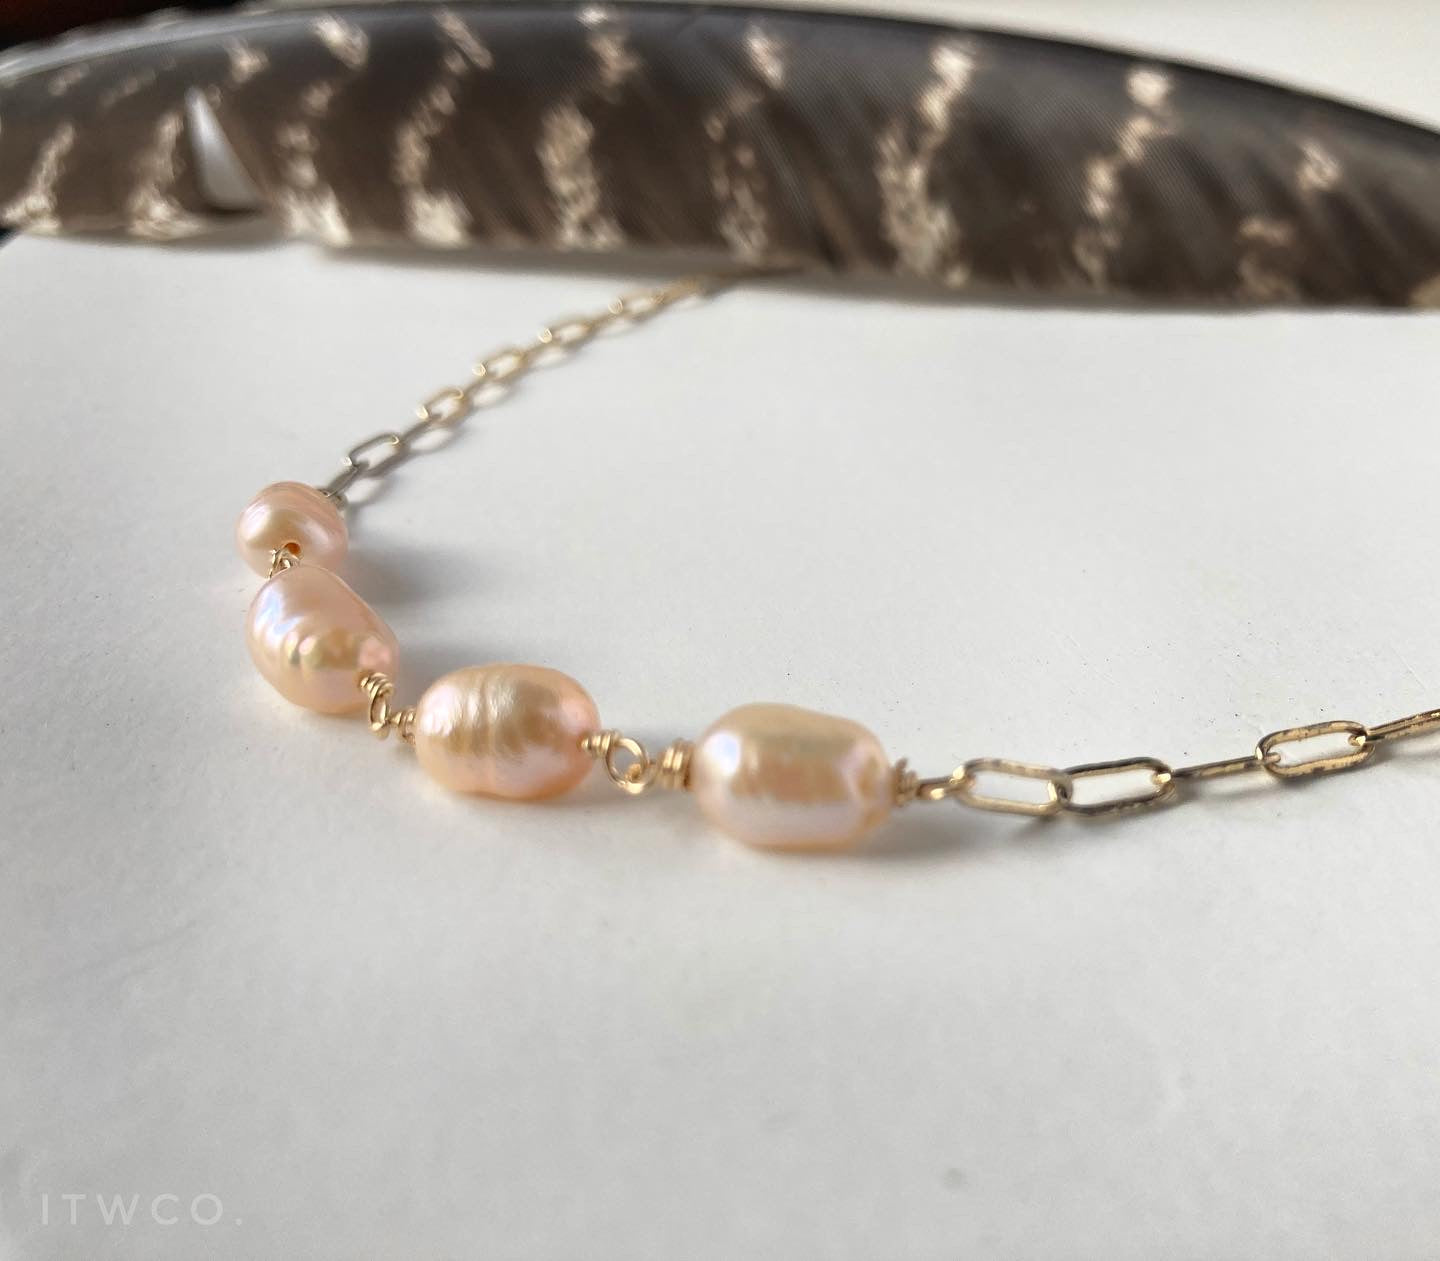 Signature Derby Classic Necklace | Rose Pearls